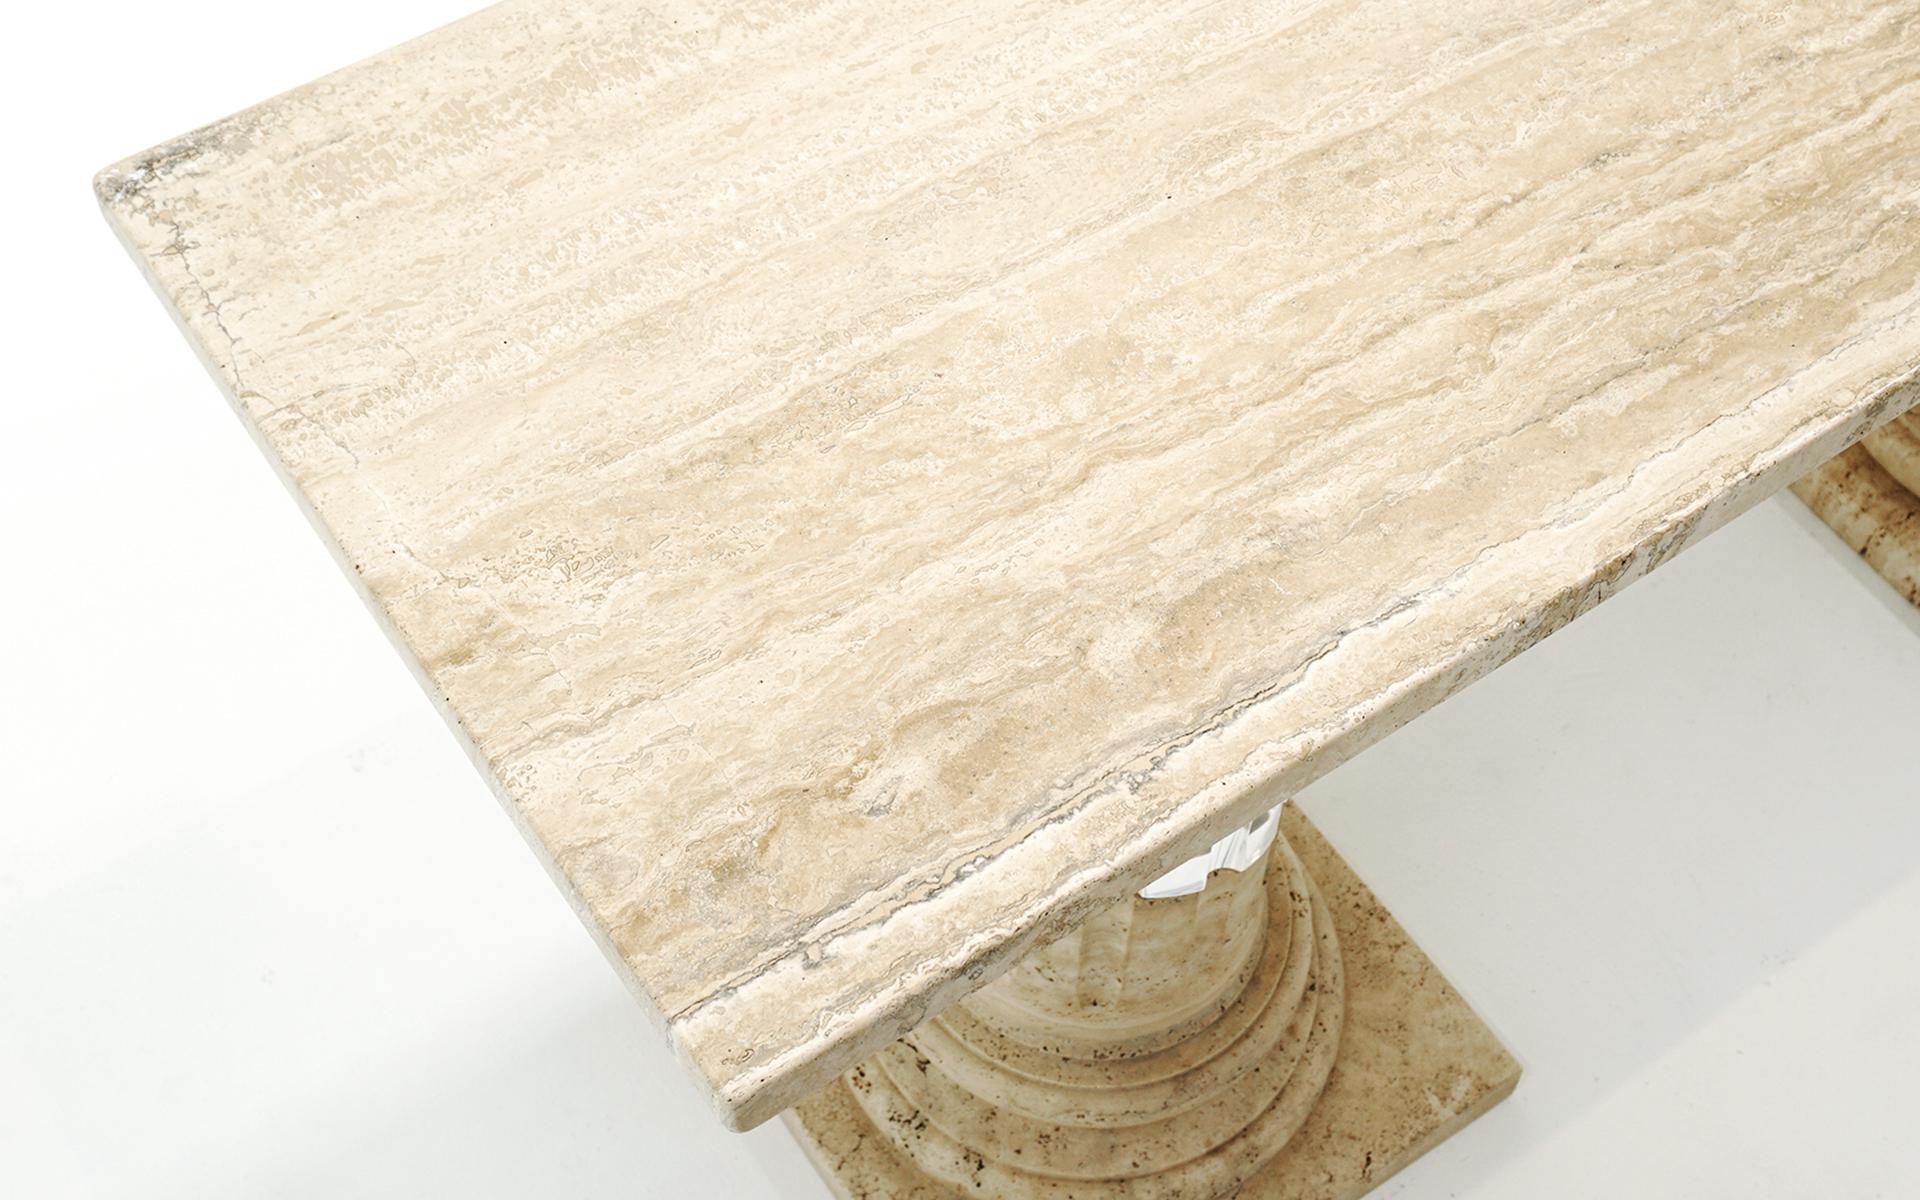 Italian Sofa / Console Table in Travertine and Acrylic by Fabian Decoration, Rome, Italy For Sale